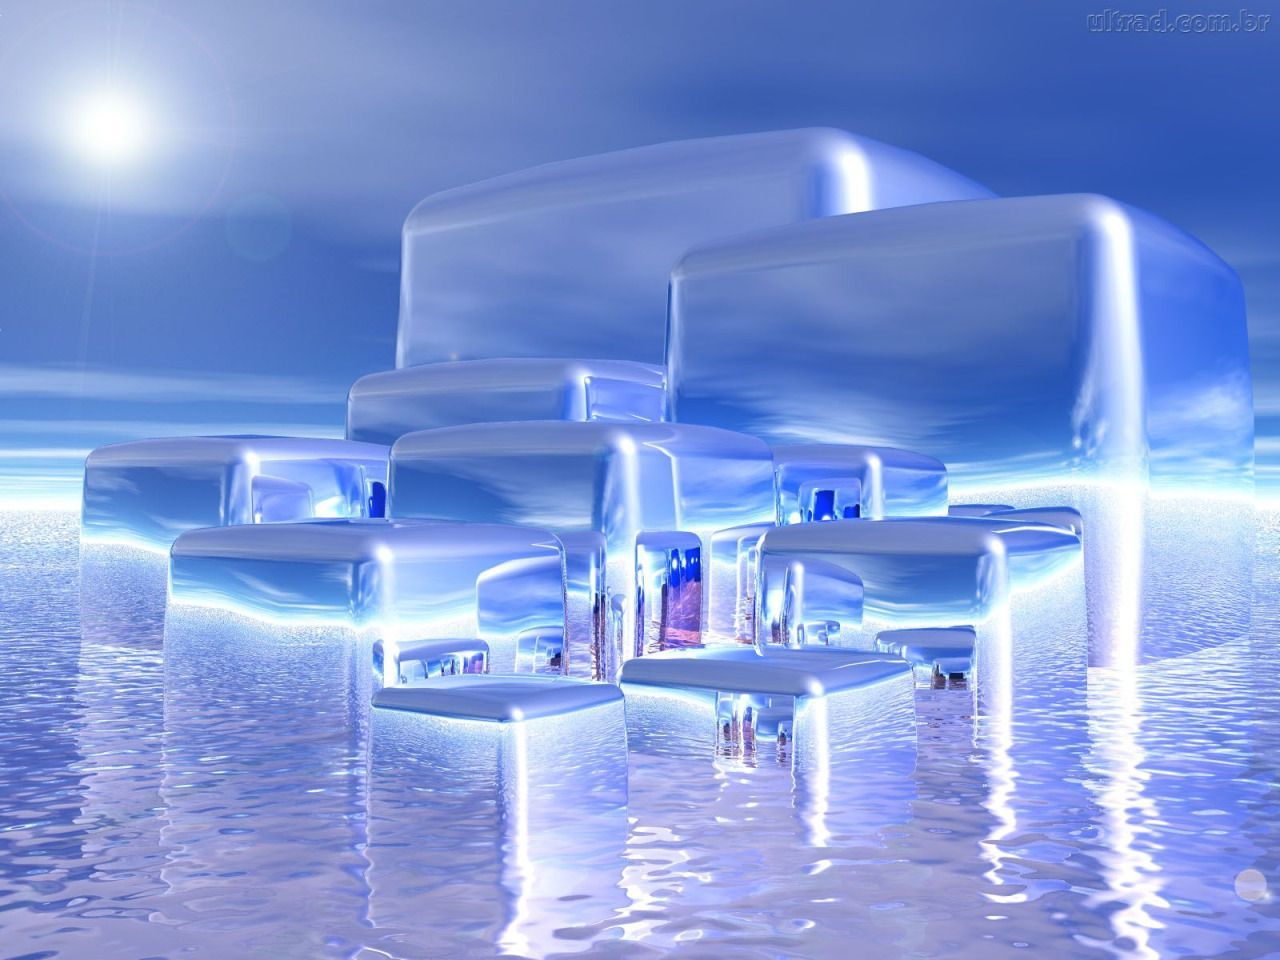 A group of blue ice blocks sitting on top of water. - 2000s, Y2K